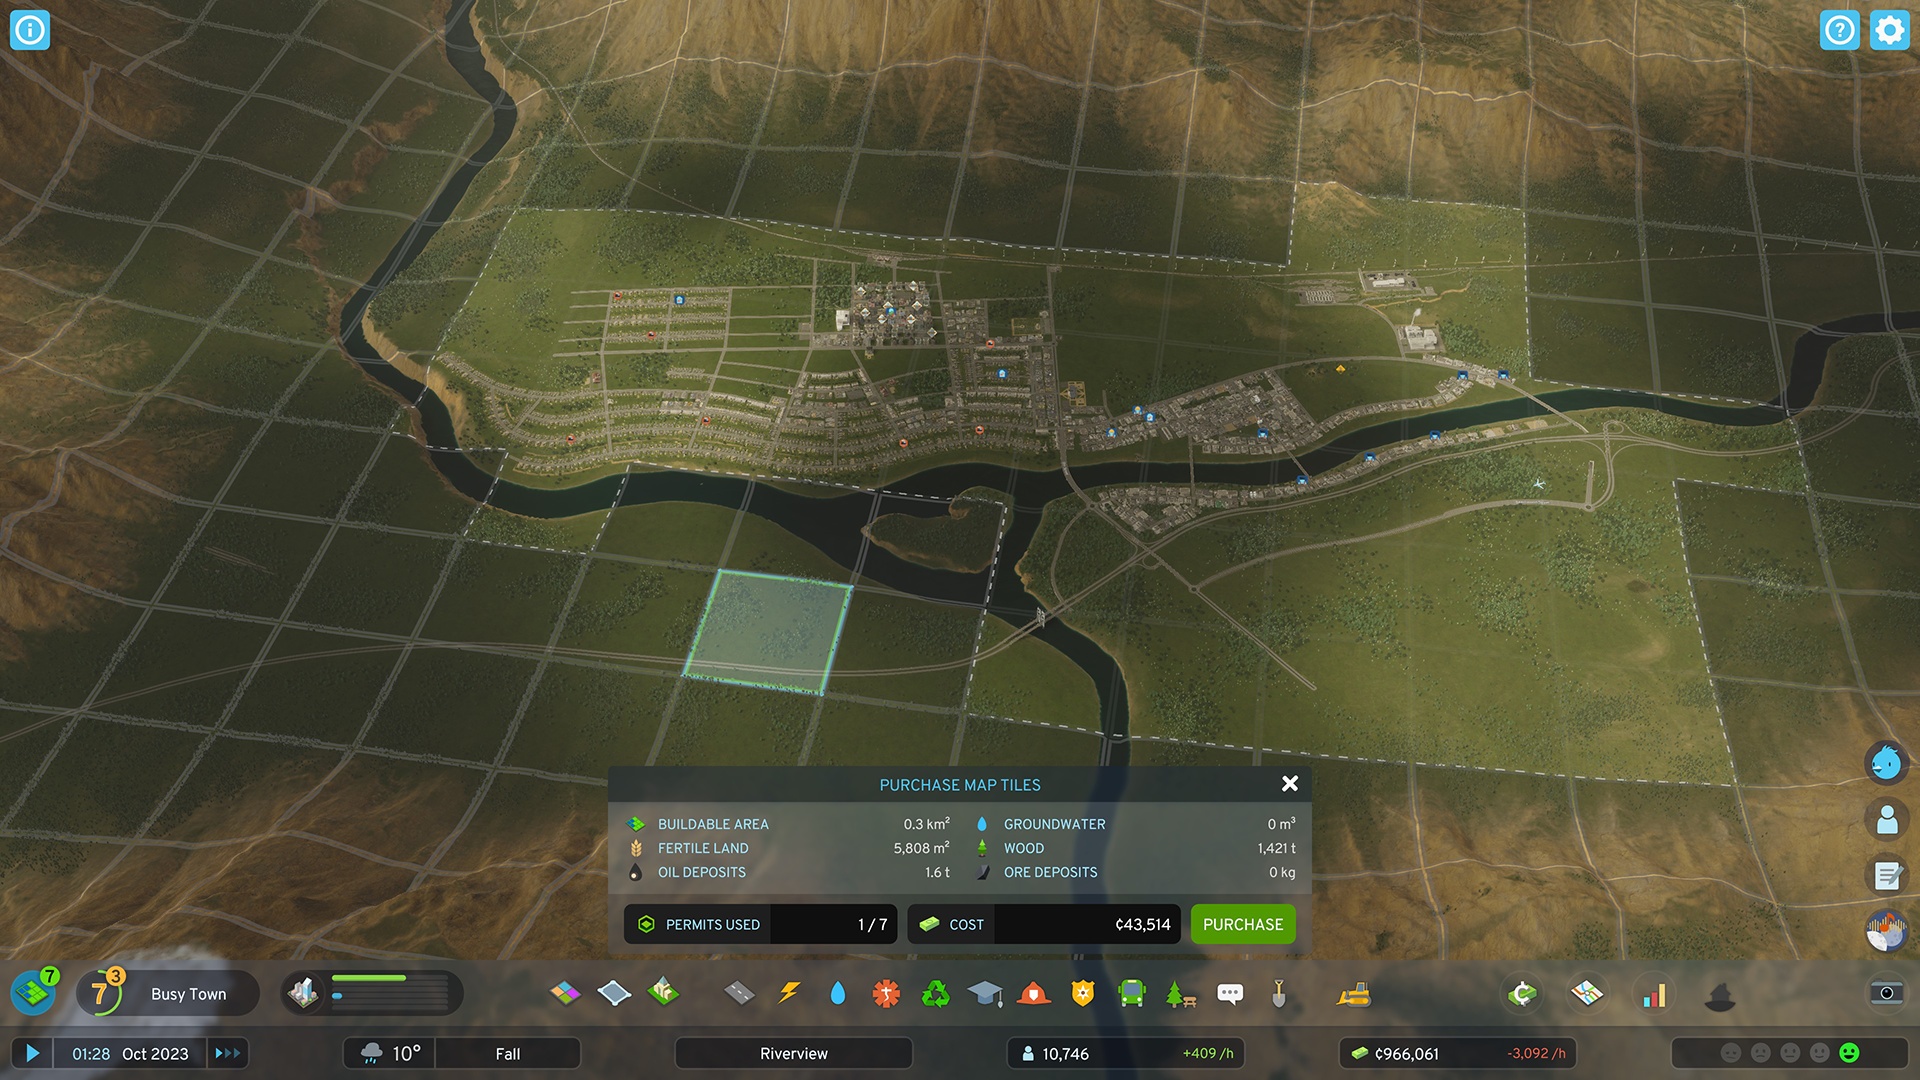 (More tiles, more info, more room for growth: This is what the new tile buy in Cities: Skylines 2 looks like)